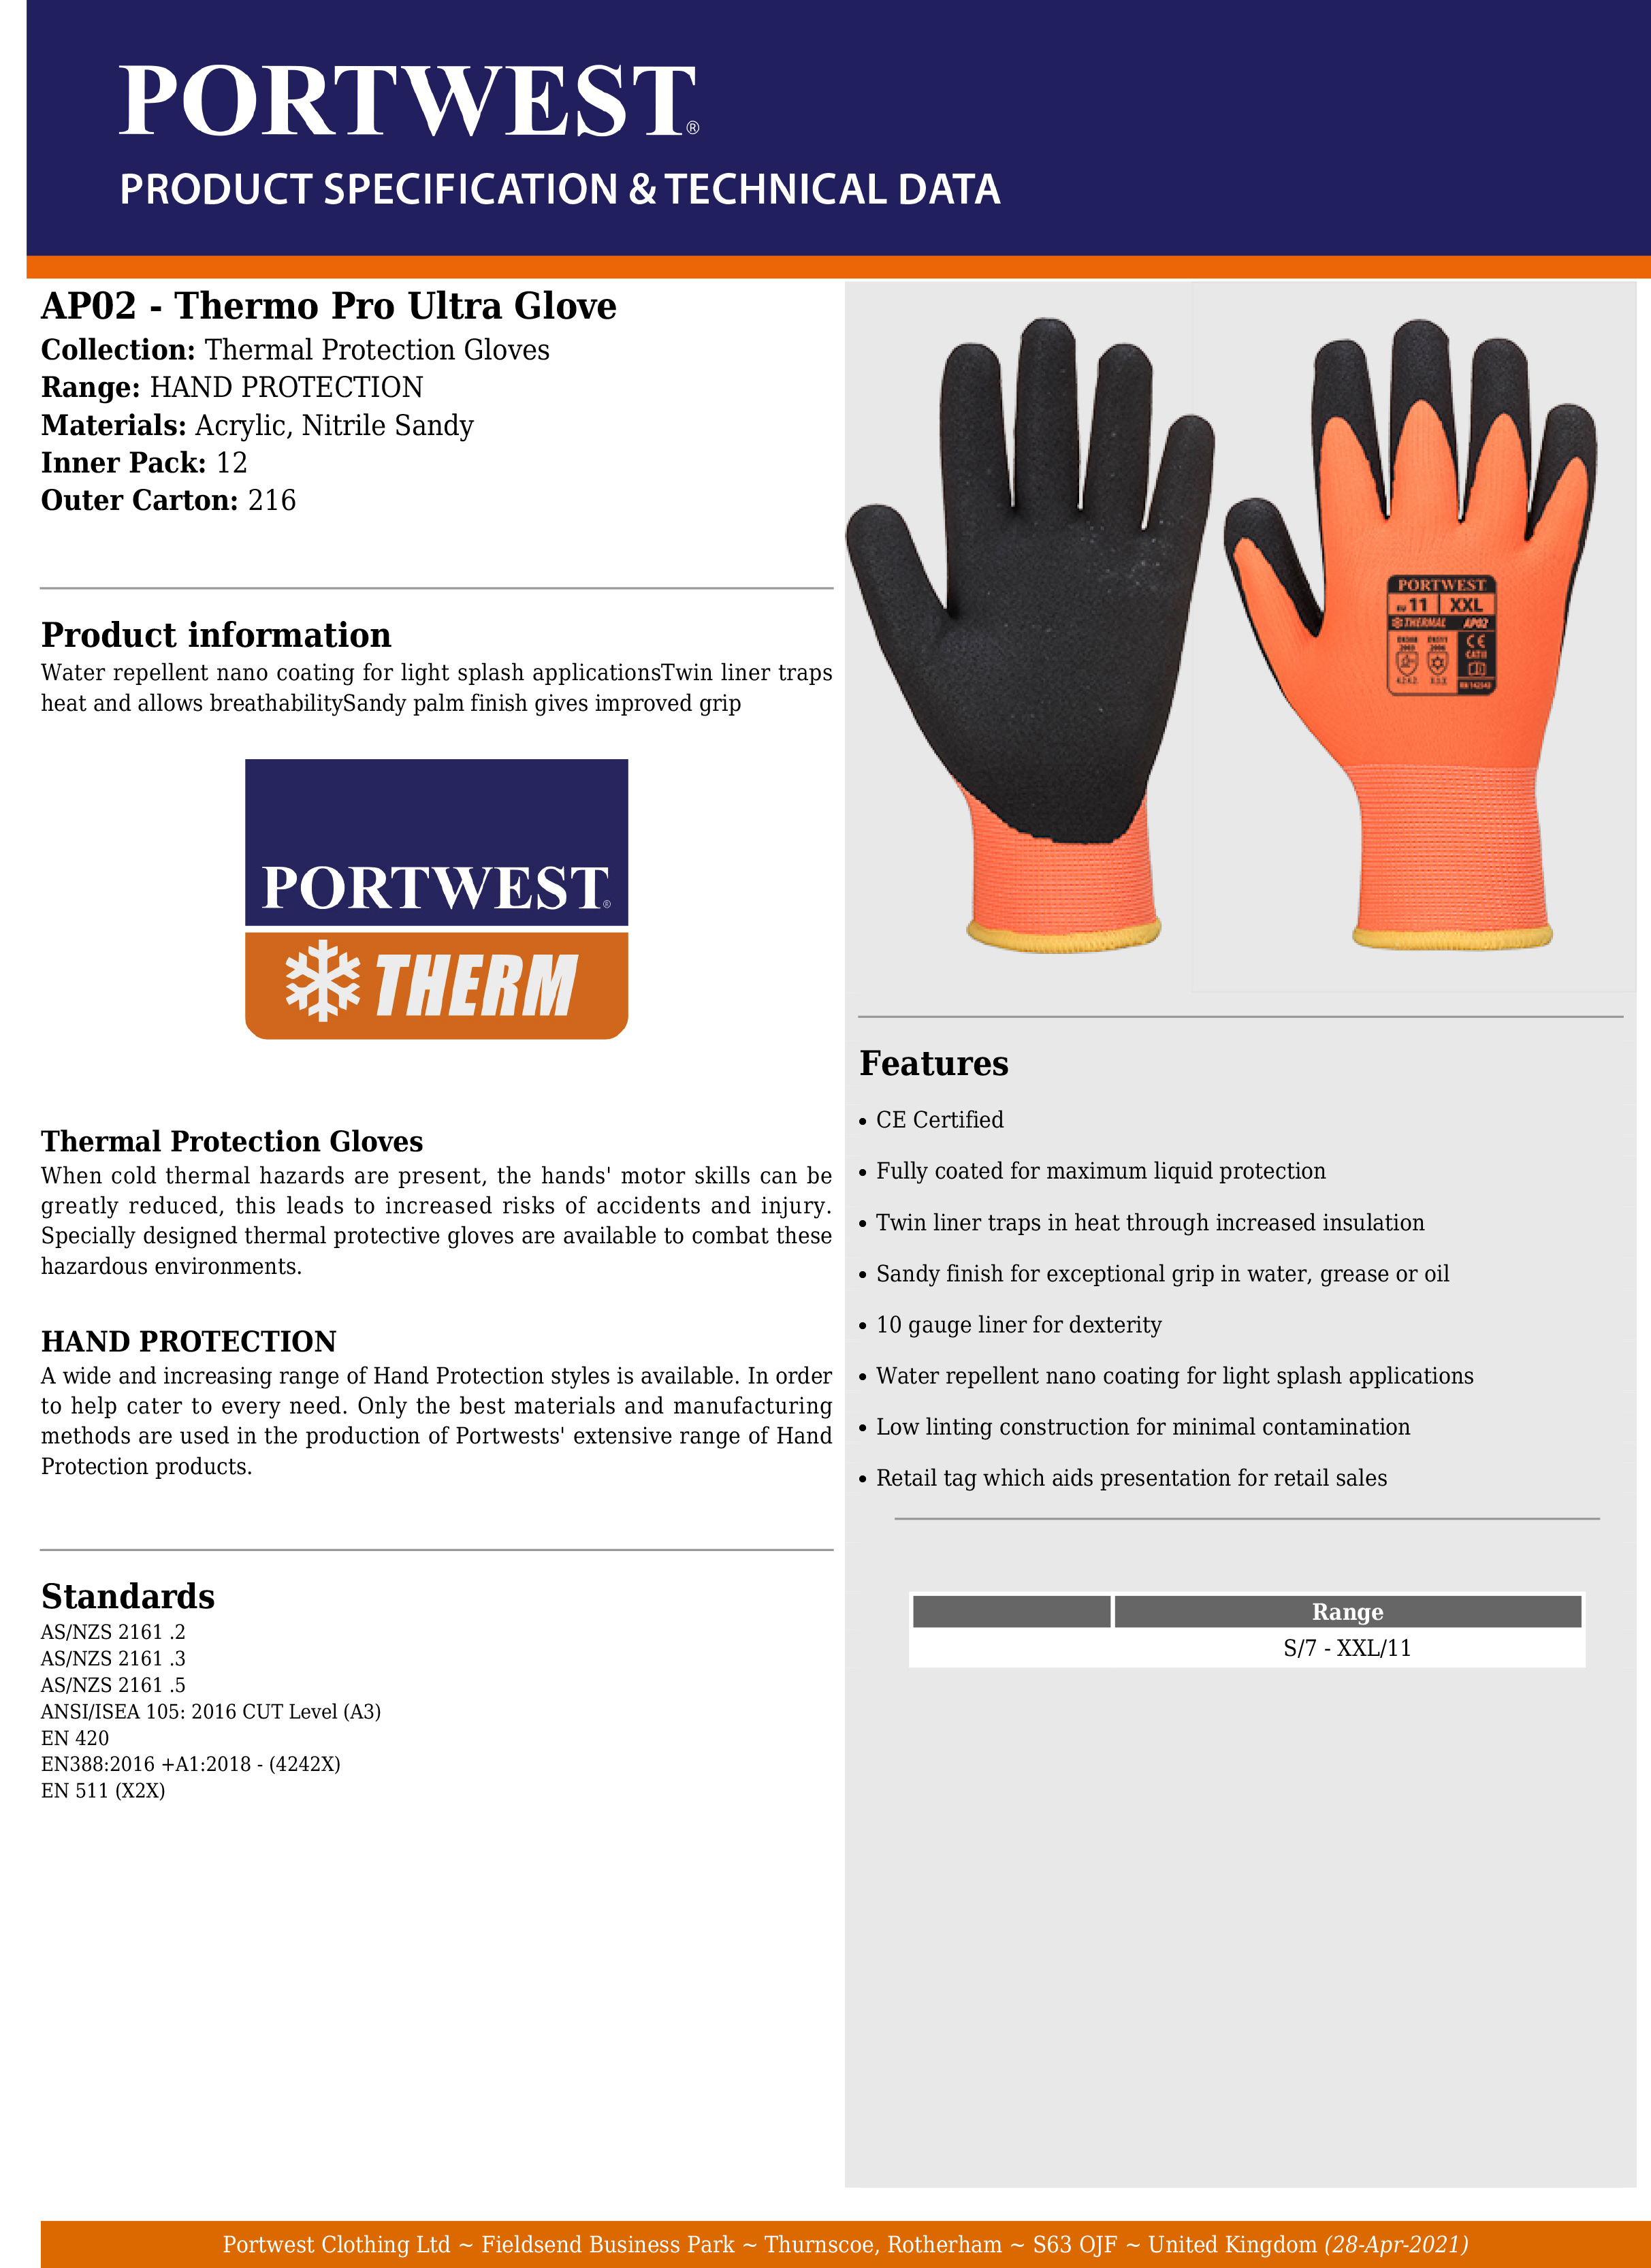 Quest Cut Resistant Work Gloves – Cut Proof Working Gloves Heavy